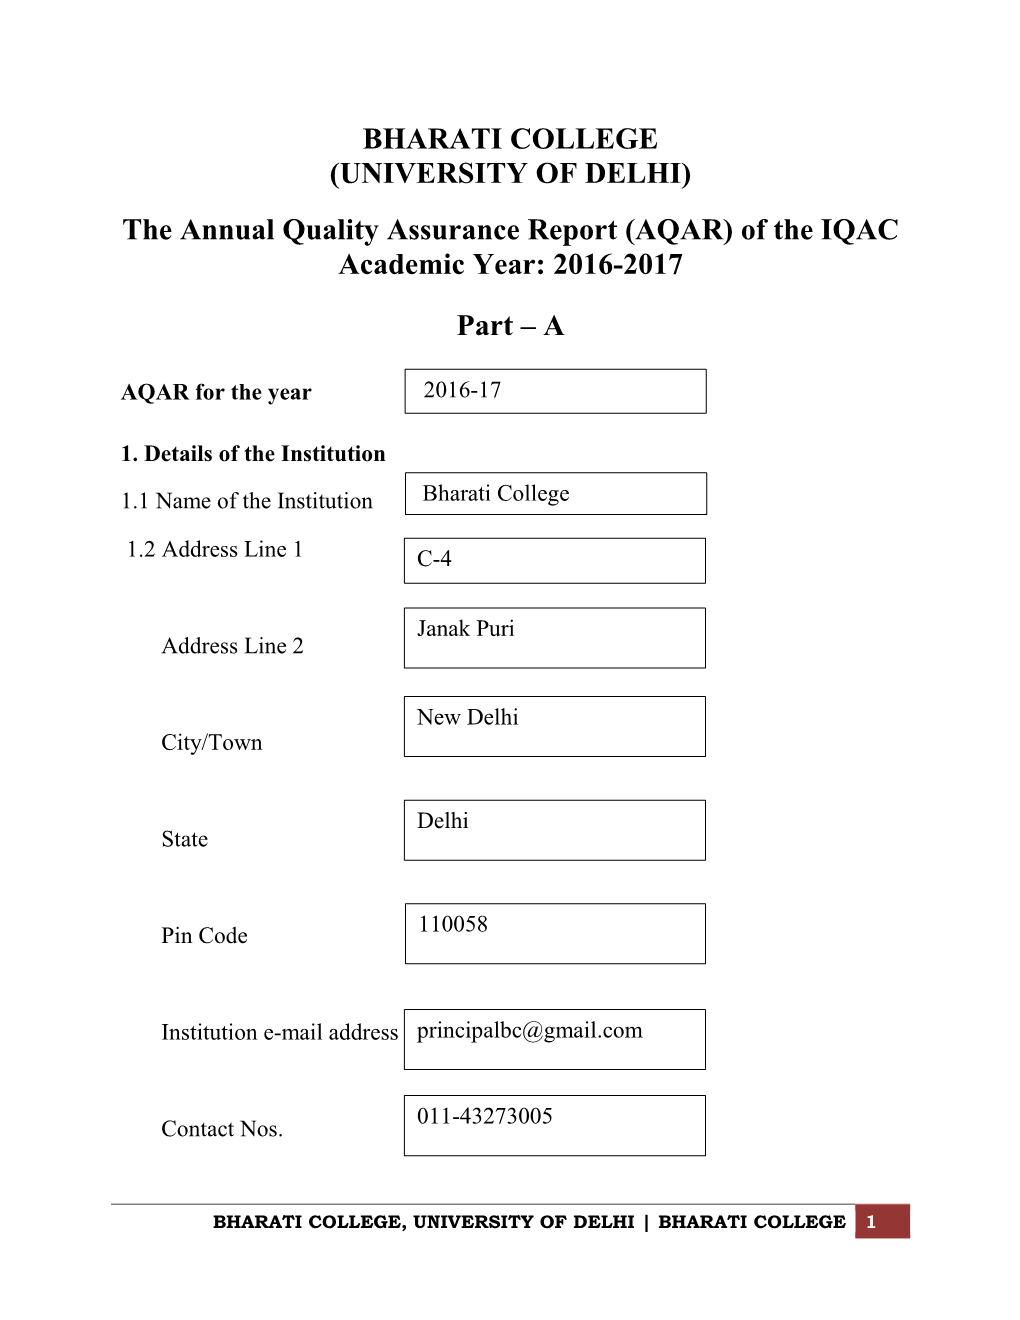 BHARATI COLLEGE (UNIVERSITY of DELHI) the Annual Quality Assurance Report (AQAR) of the IQAC Academic Year: 2016-2017 Part